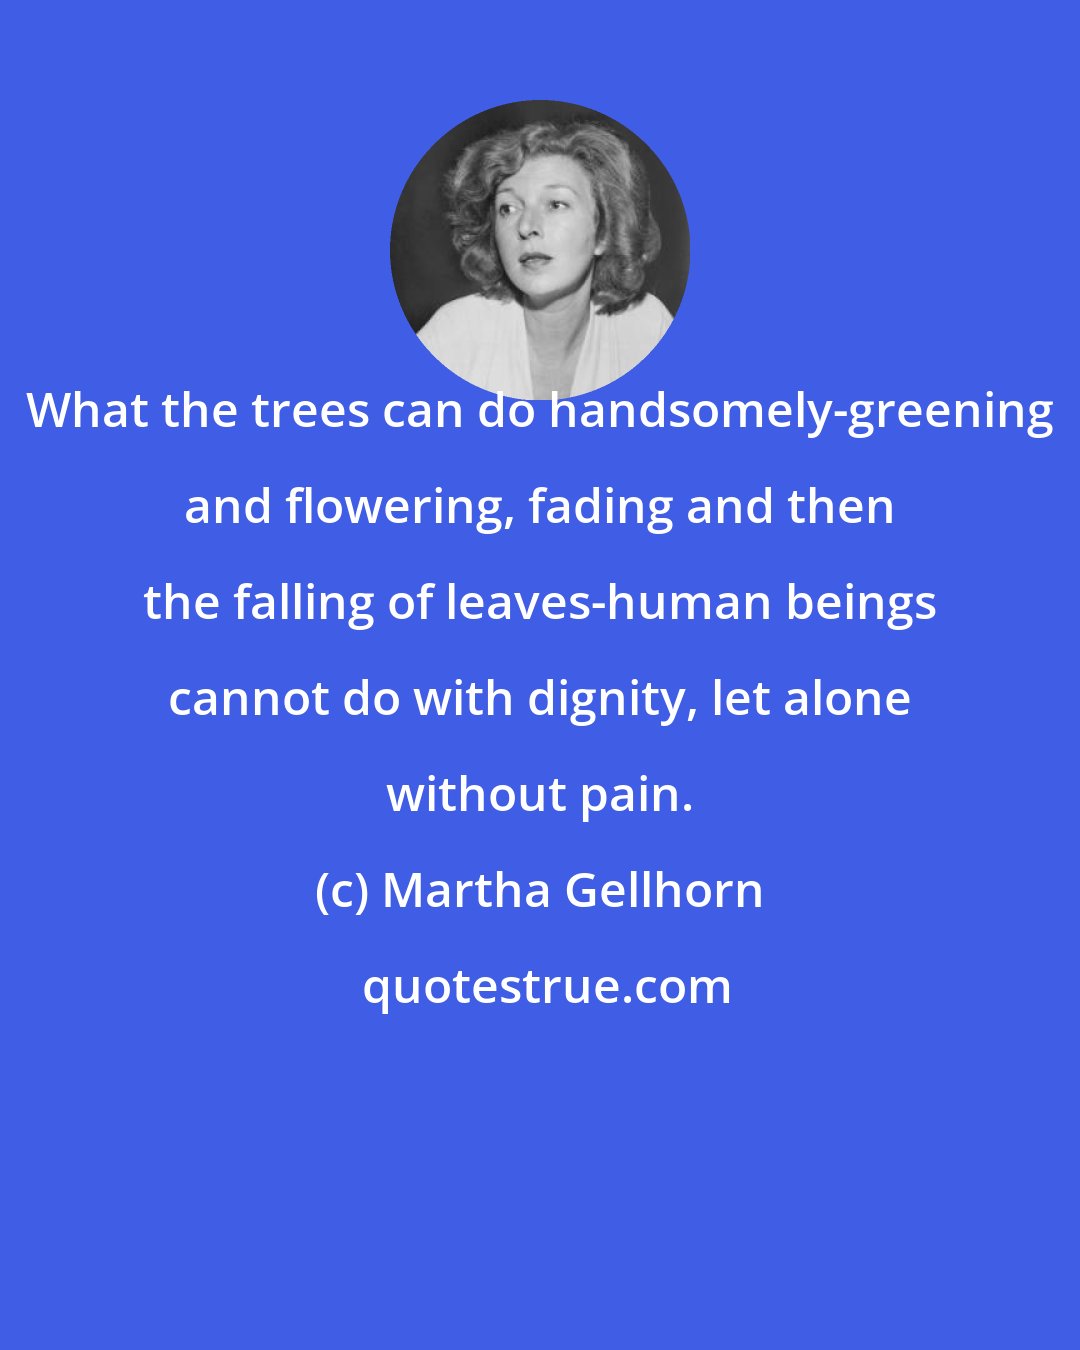 Martha Gellhorn: What the trees can do handsomely-greening and flowering, fading and then the falling of leaves-human beings cannot do with dignity, let alone without pain.